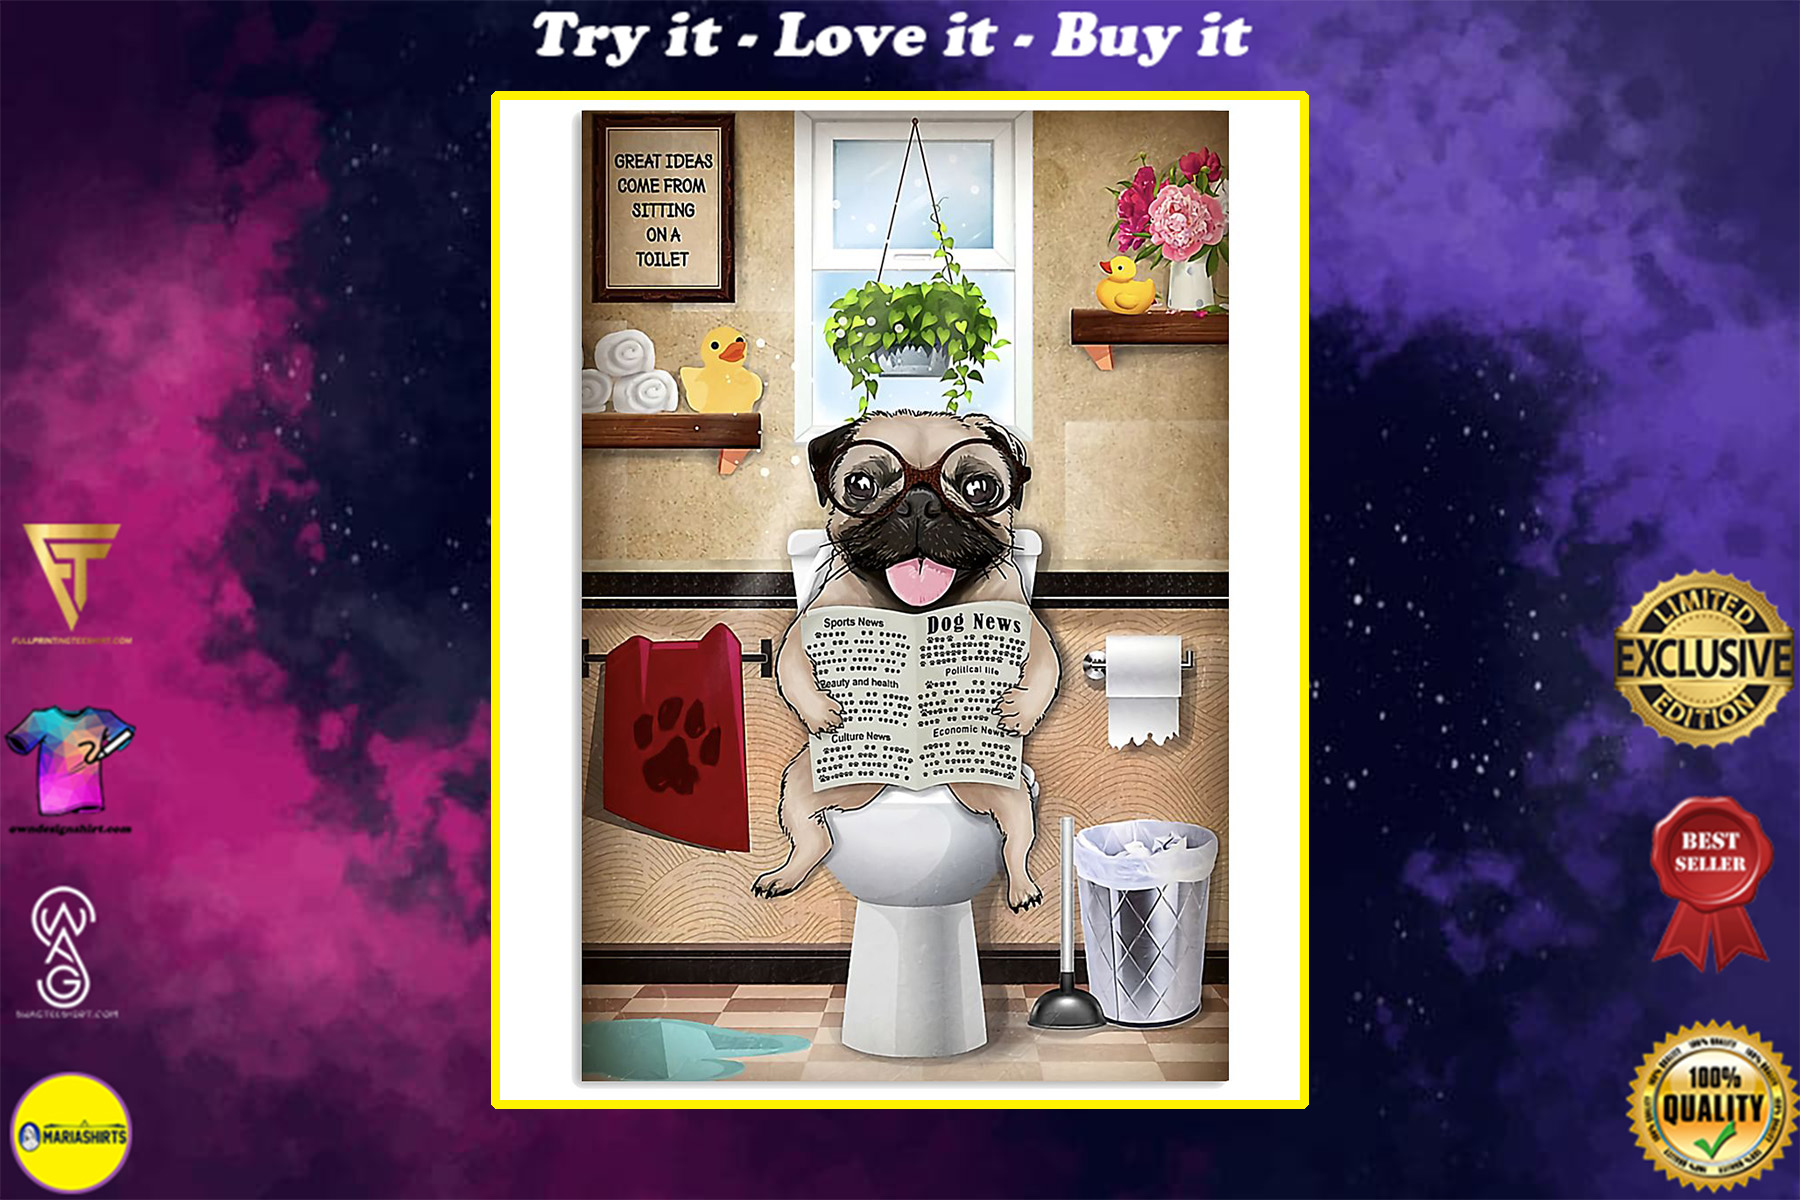 pug sitting on toilet great ideas poster